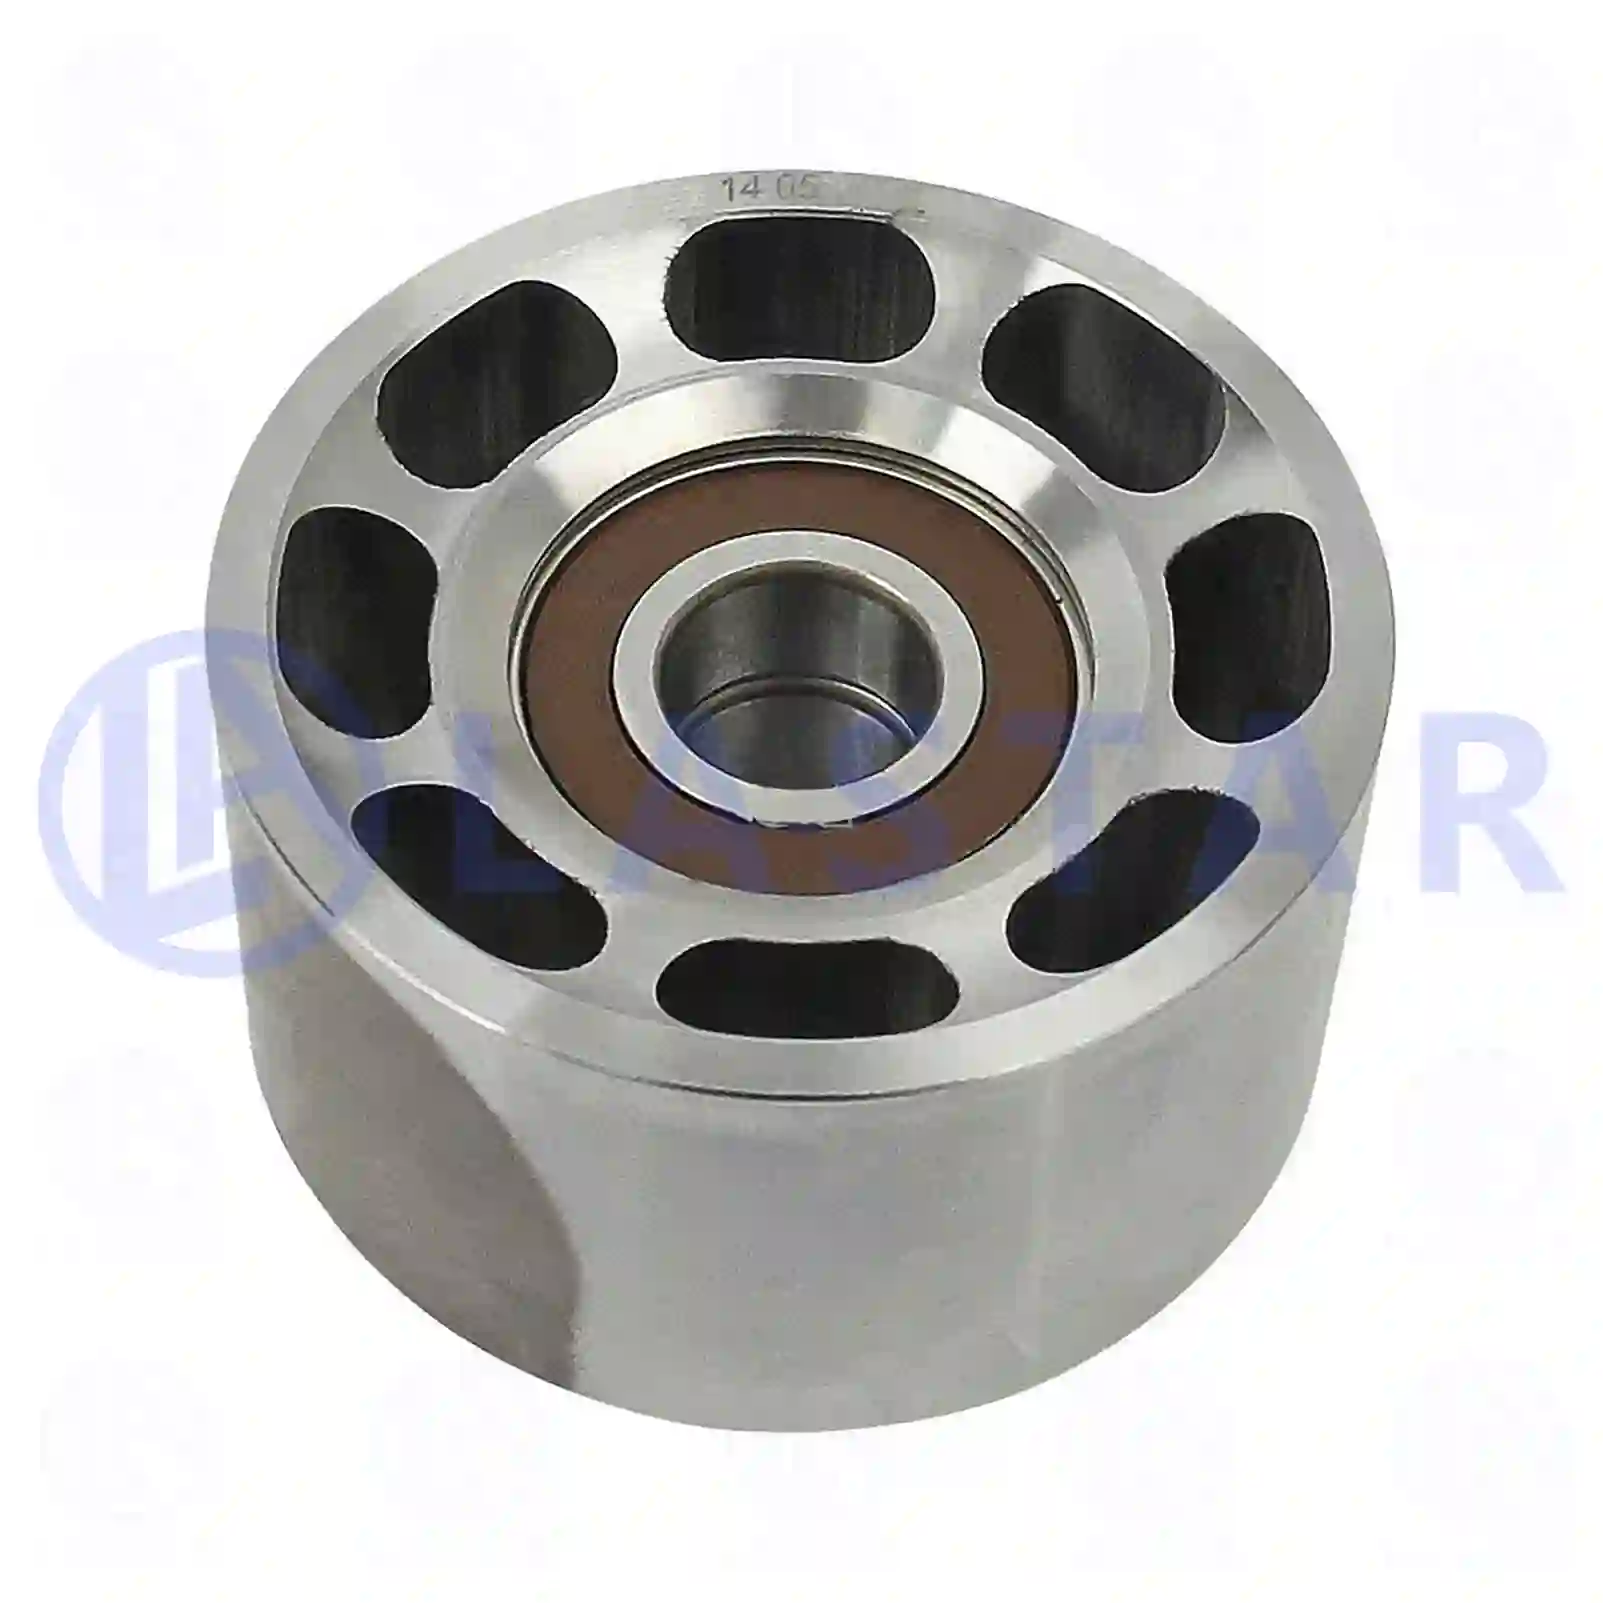 Tension roller, 77707552, 1383564, , ||  77707552 Lastar Spare Part | Truck Spare Parts, Auotomotive Spare Parts Tension roller, 77707552, 1383564, , ||  77707552 Lastar Spare Part | Truck Spare Parts, Auotomotive Spare Parts